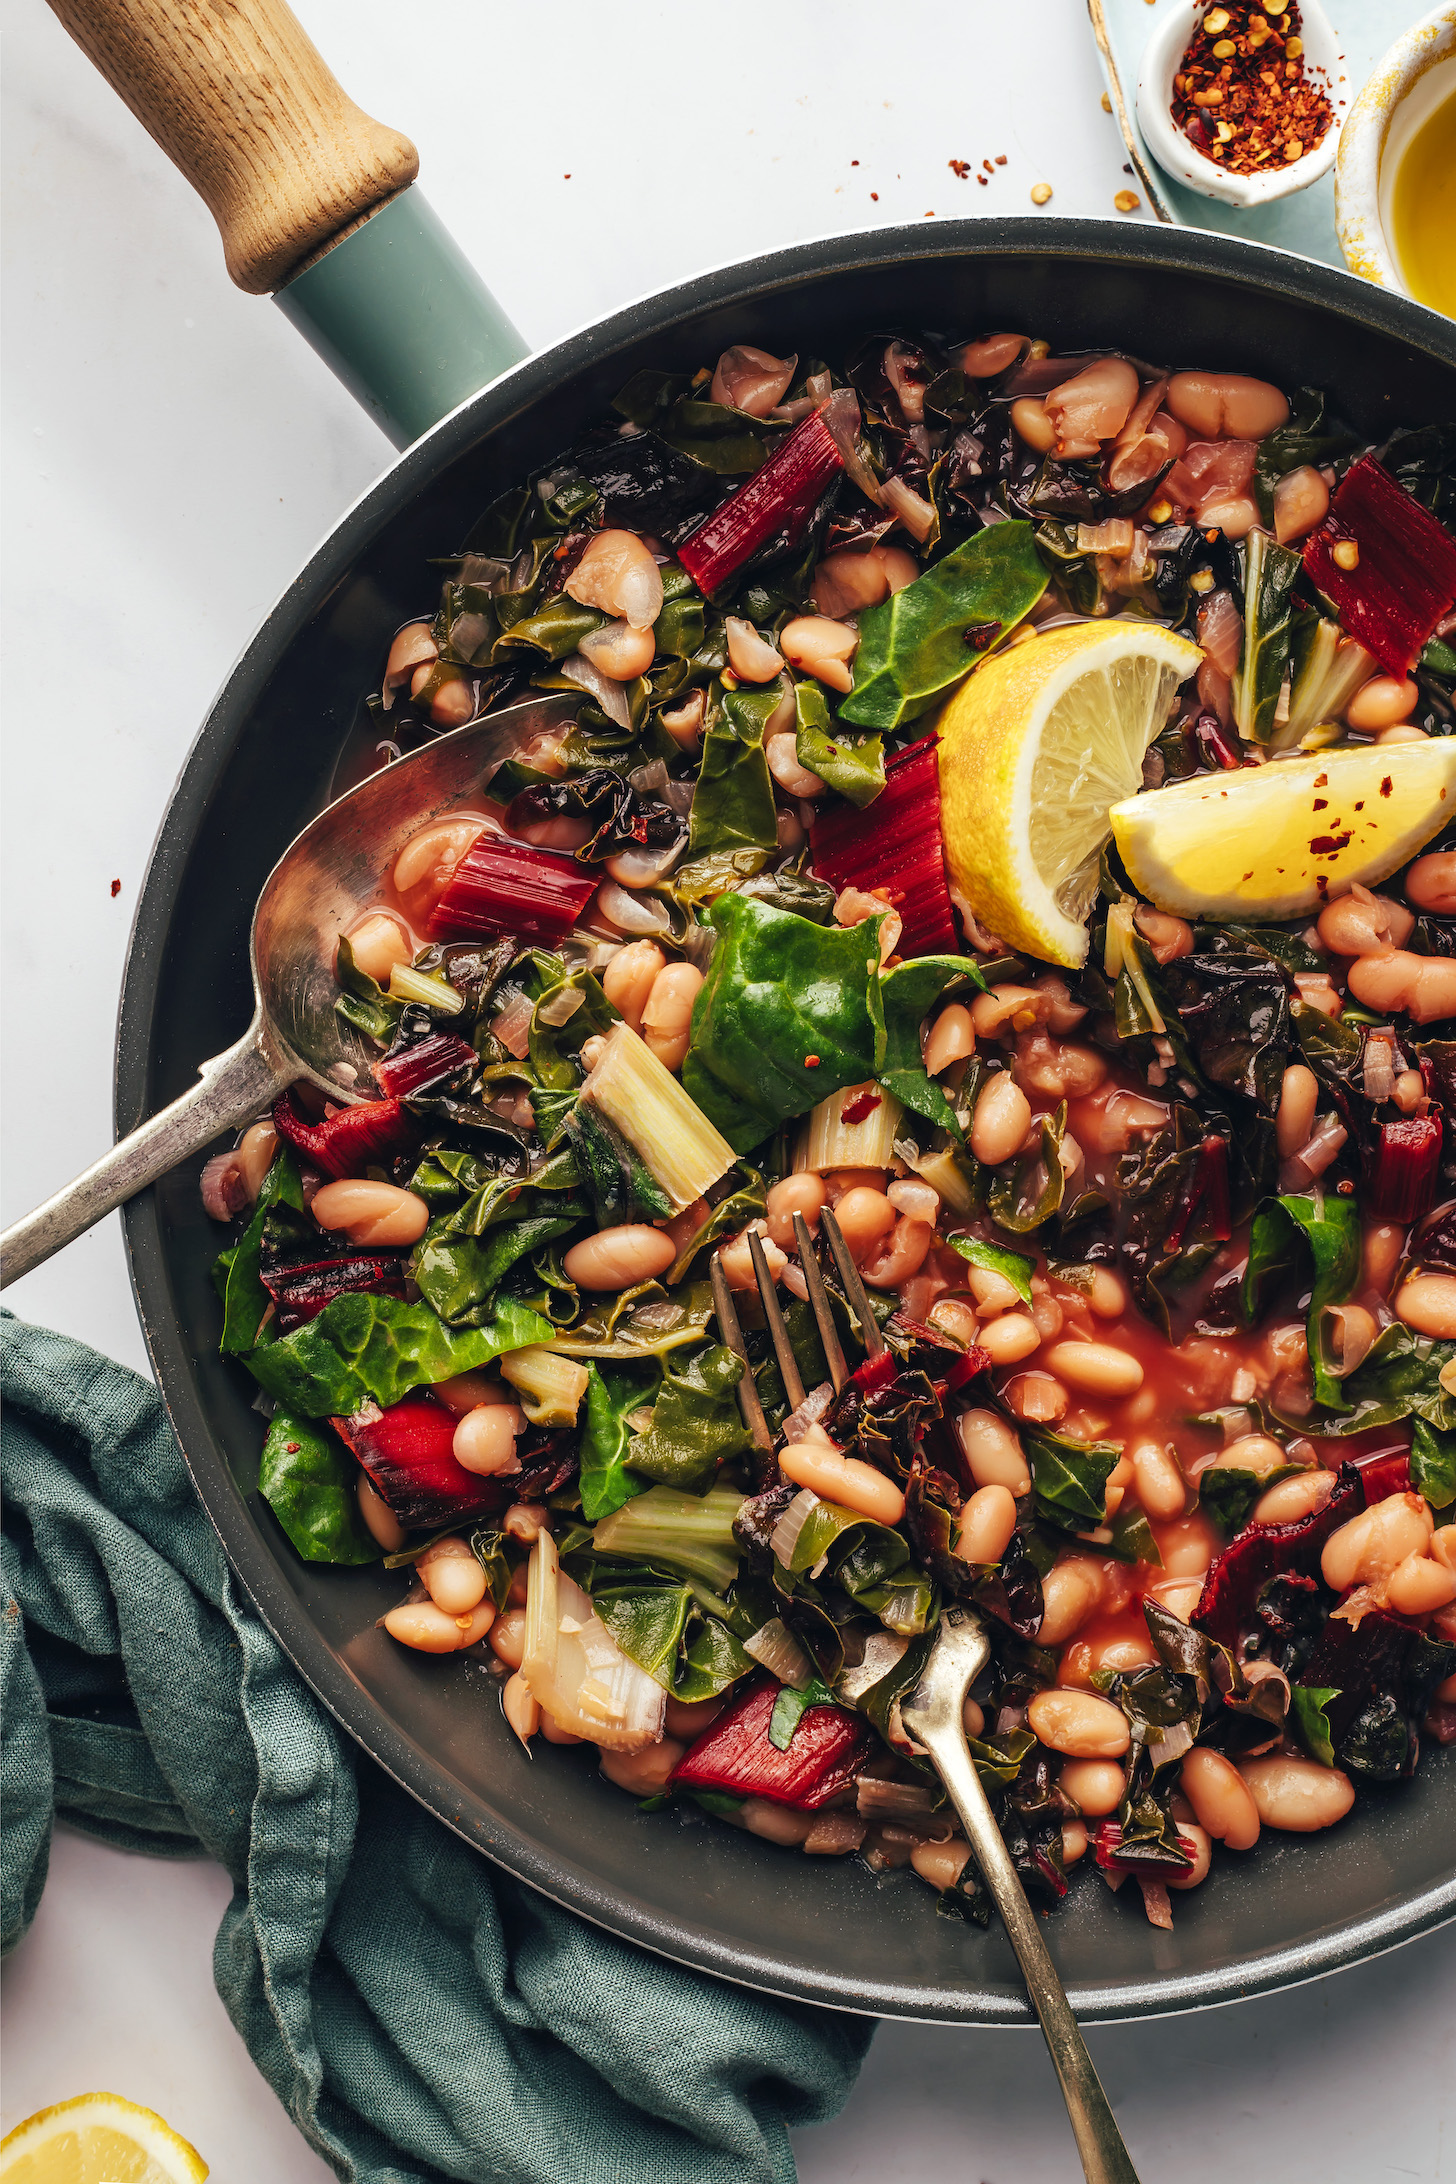 Lemon wedges in a skillet of beans and greens